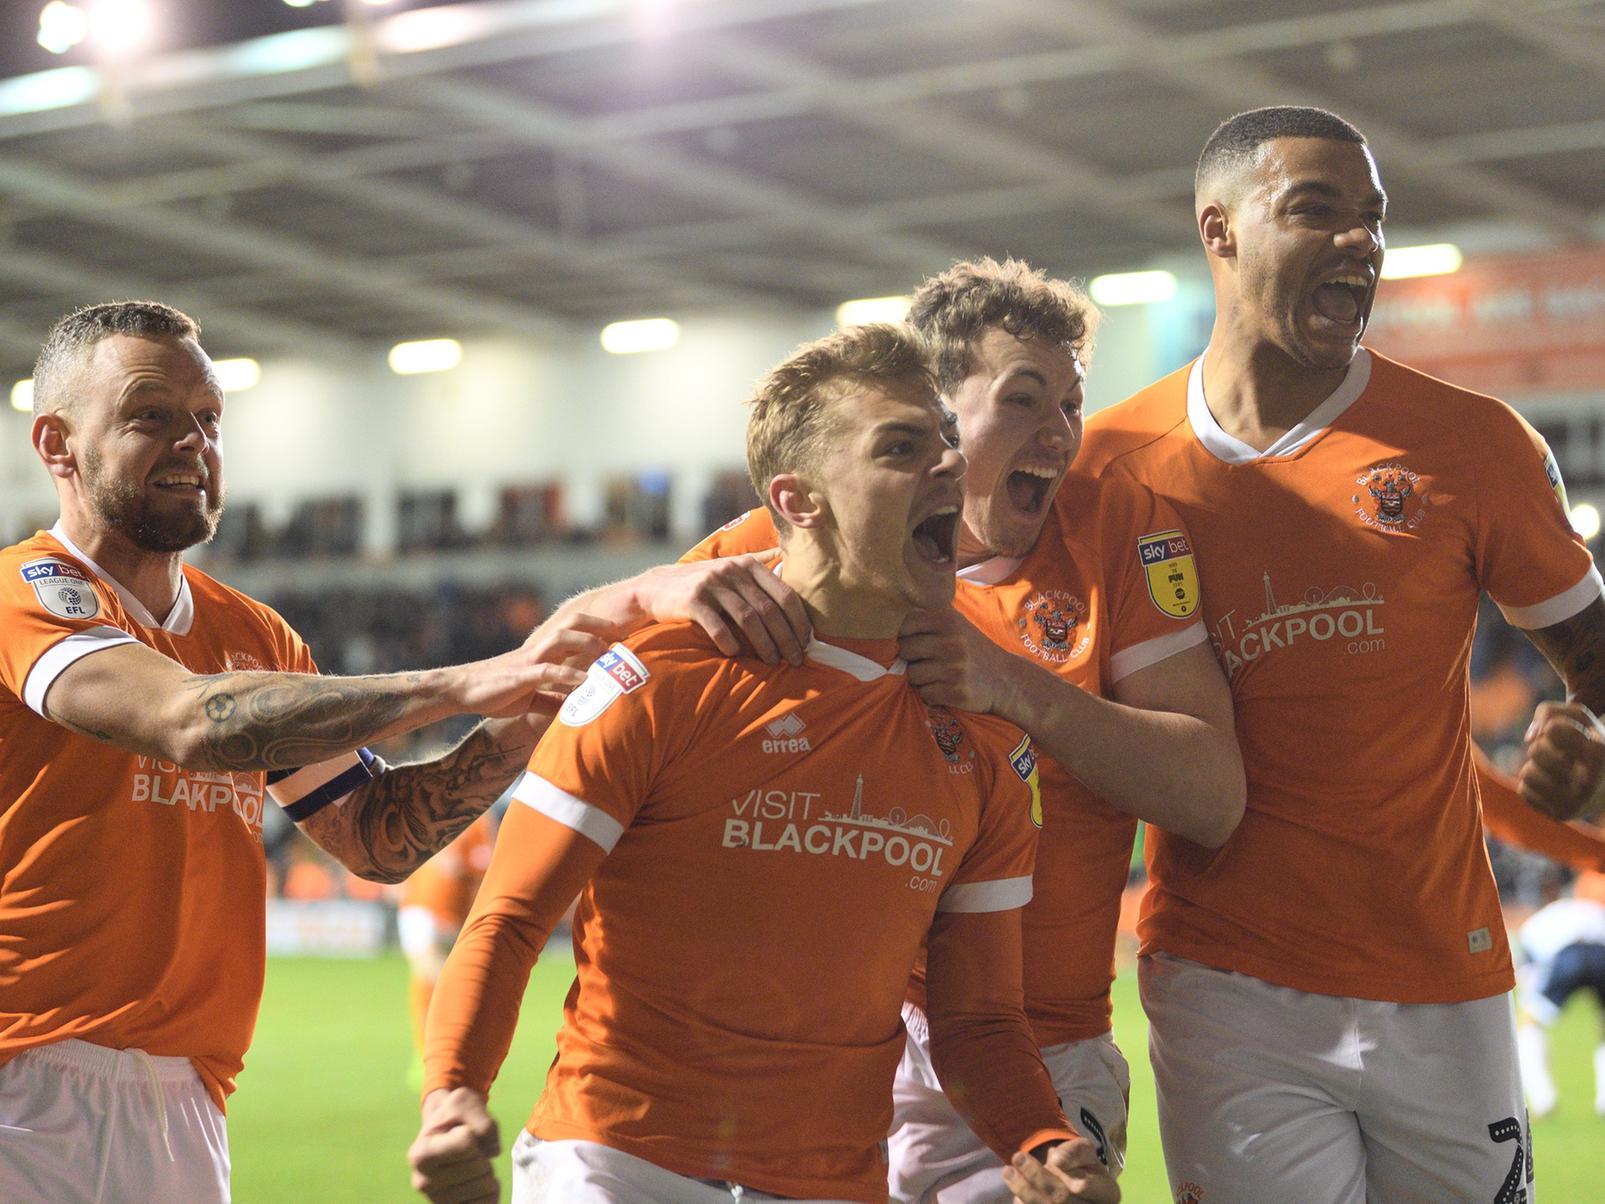 Data experts predict where Blackpool will finish in League One this season